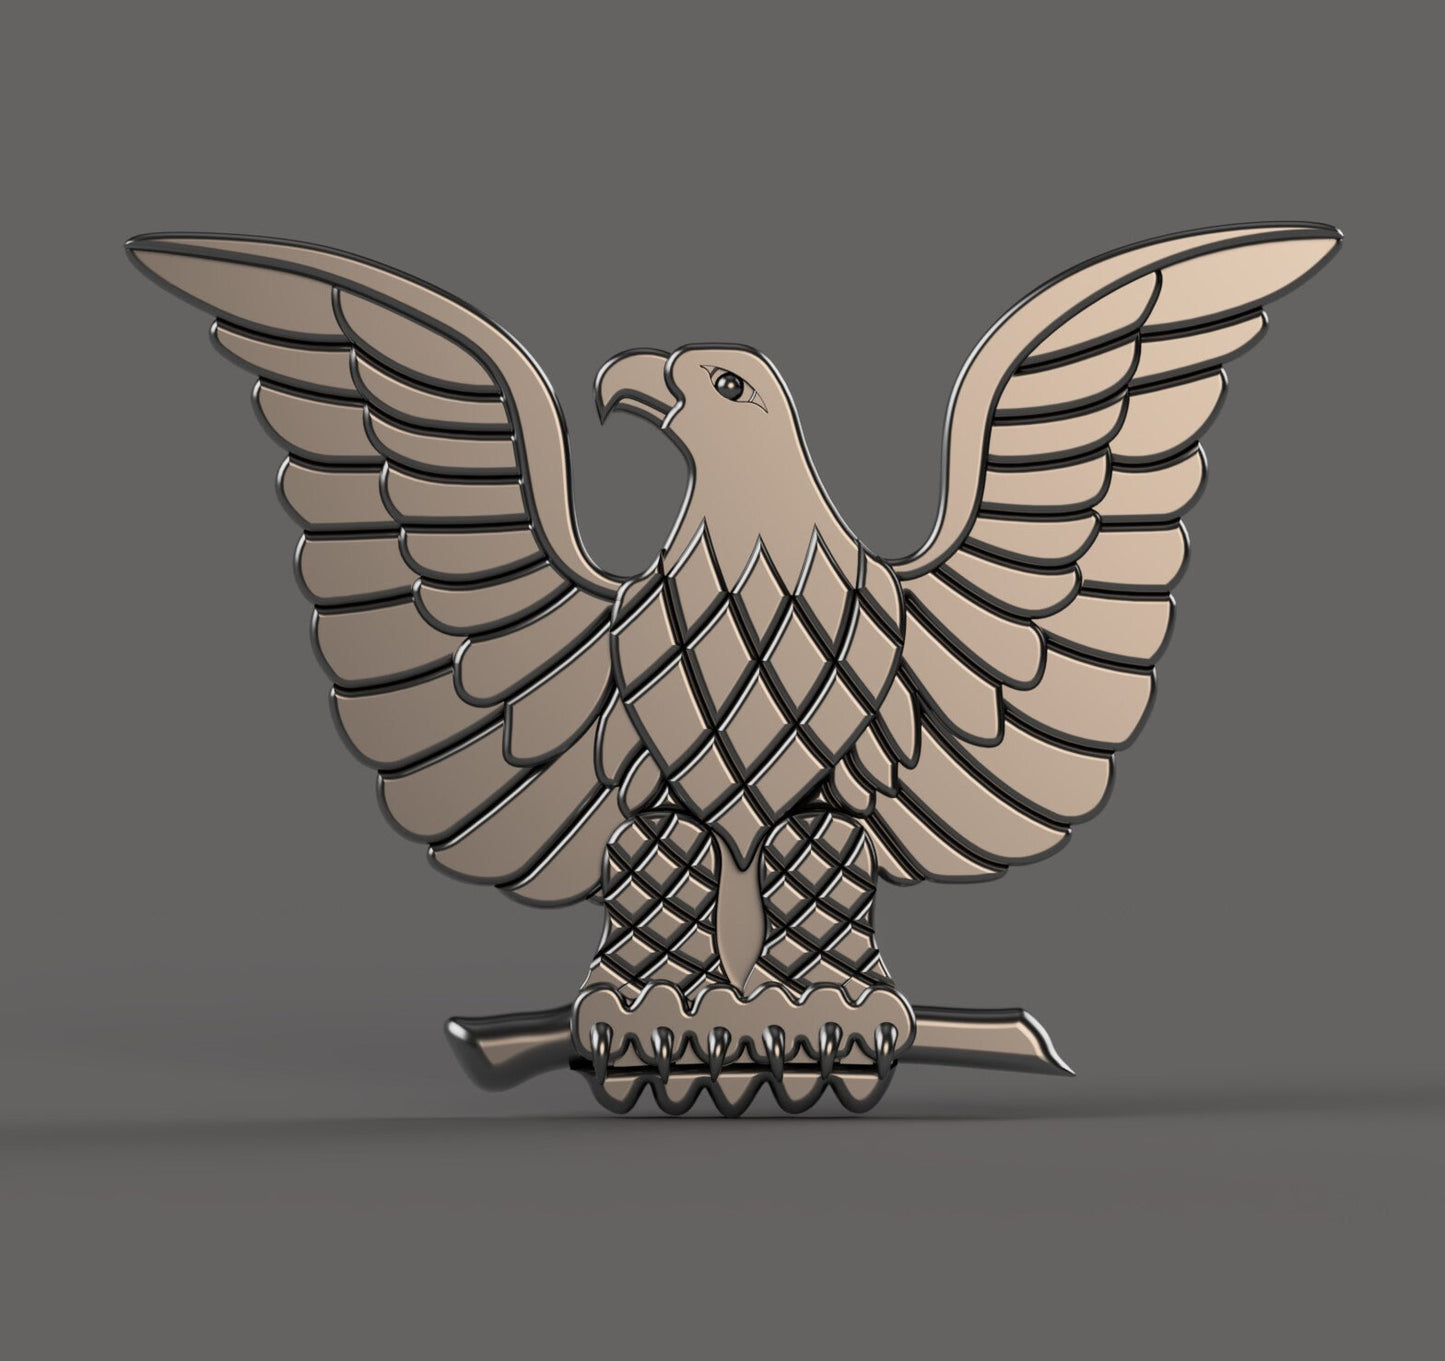 Navy Petty Officer perched eagle insignia 3D stl file for CNC router